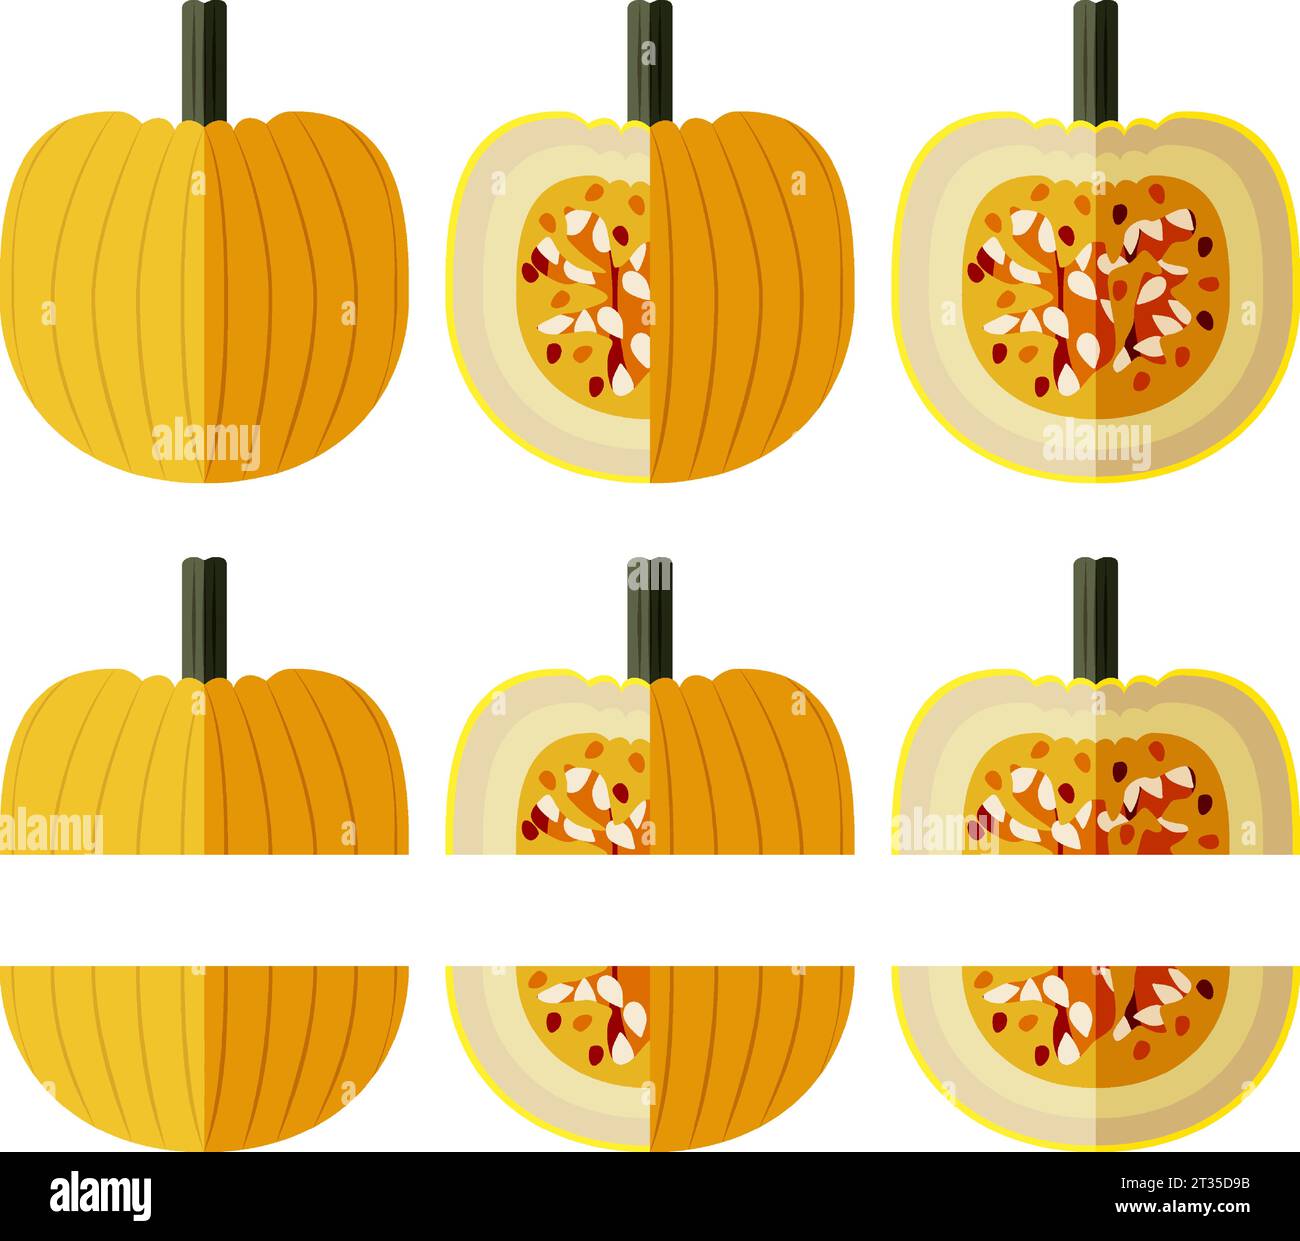 Set of Mellow Yellow Pumpkin. Winter squash. Cucurbita pepo. Fruits and vegetables. Flat style. Isolated vector illustration. Stock Vector